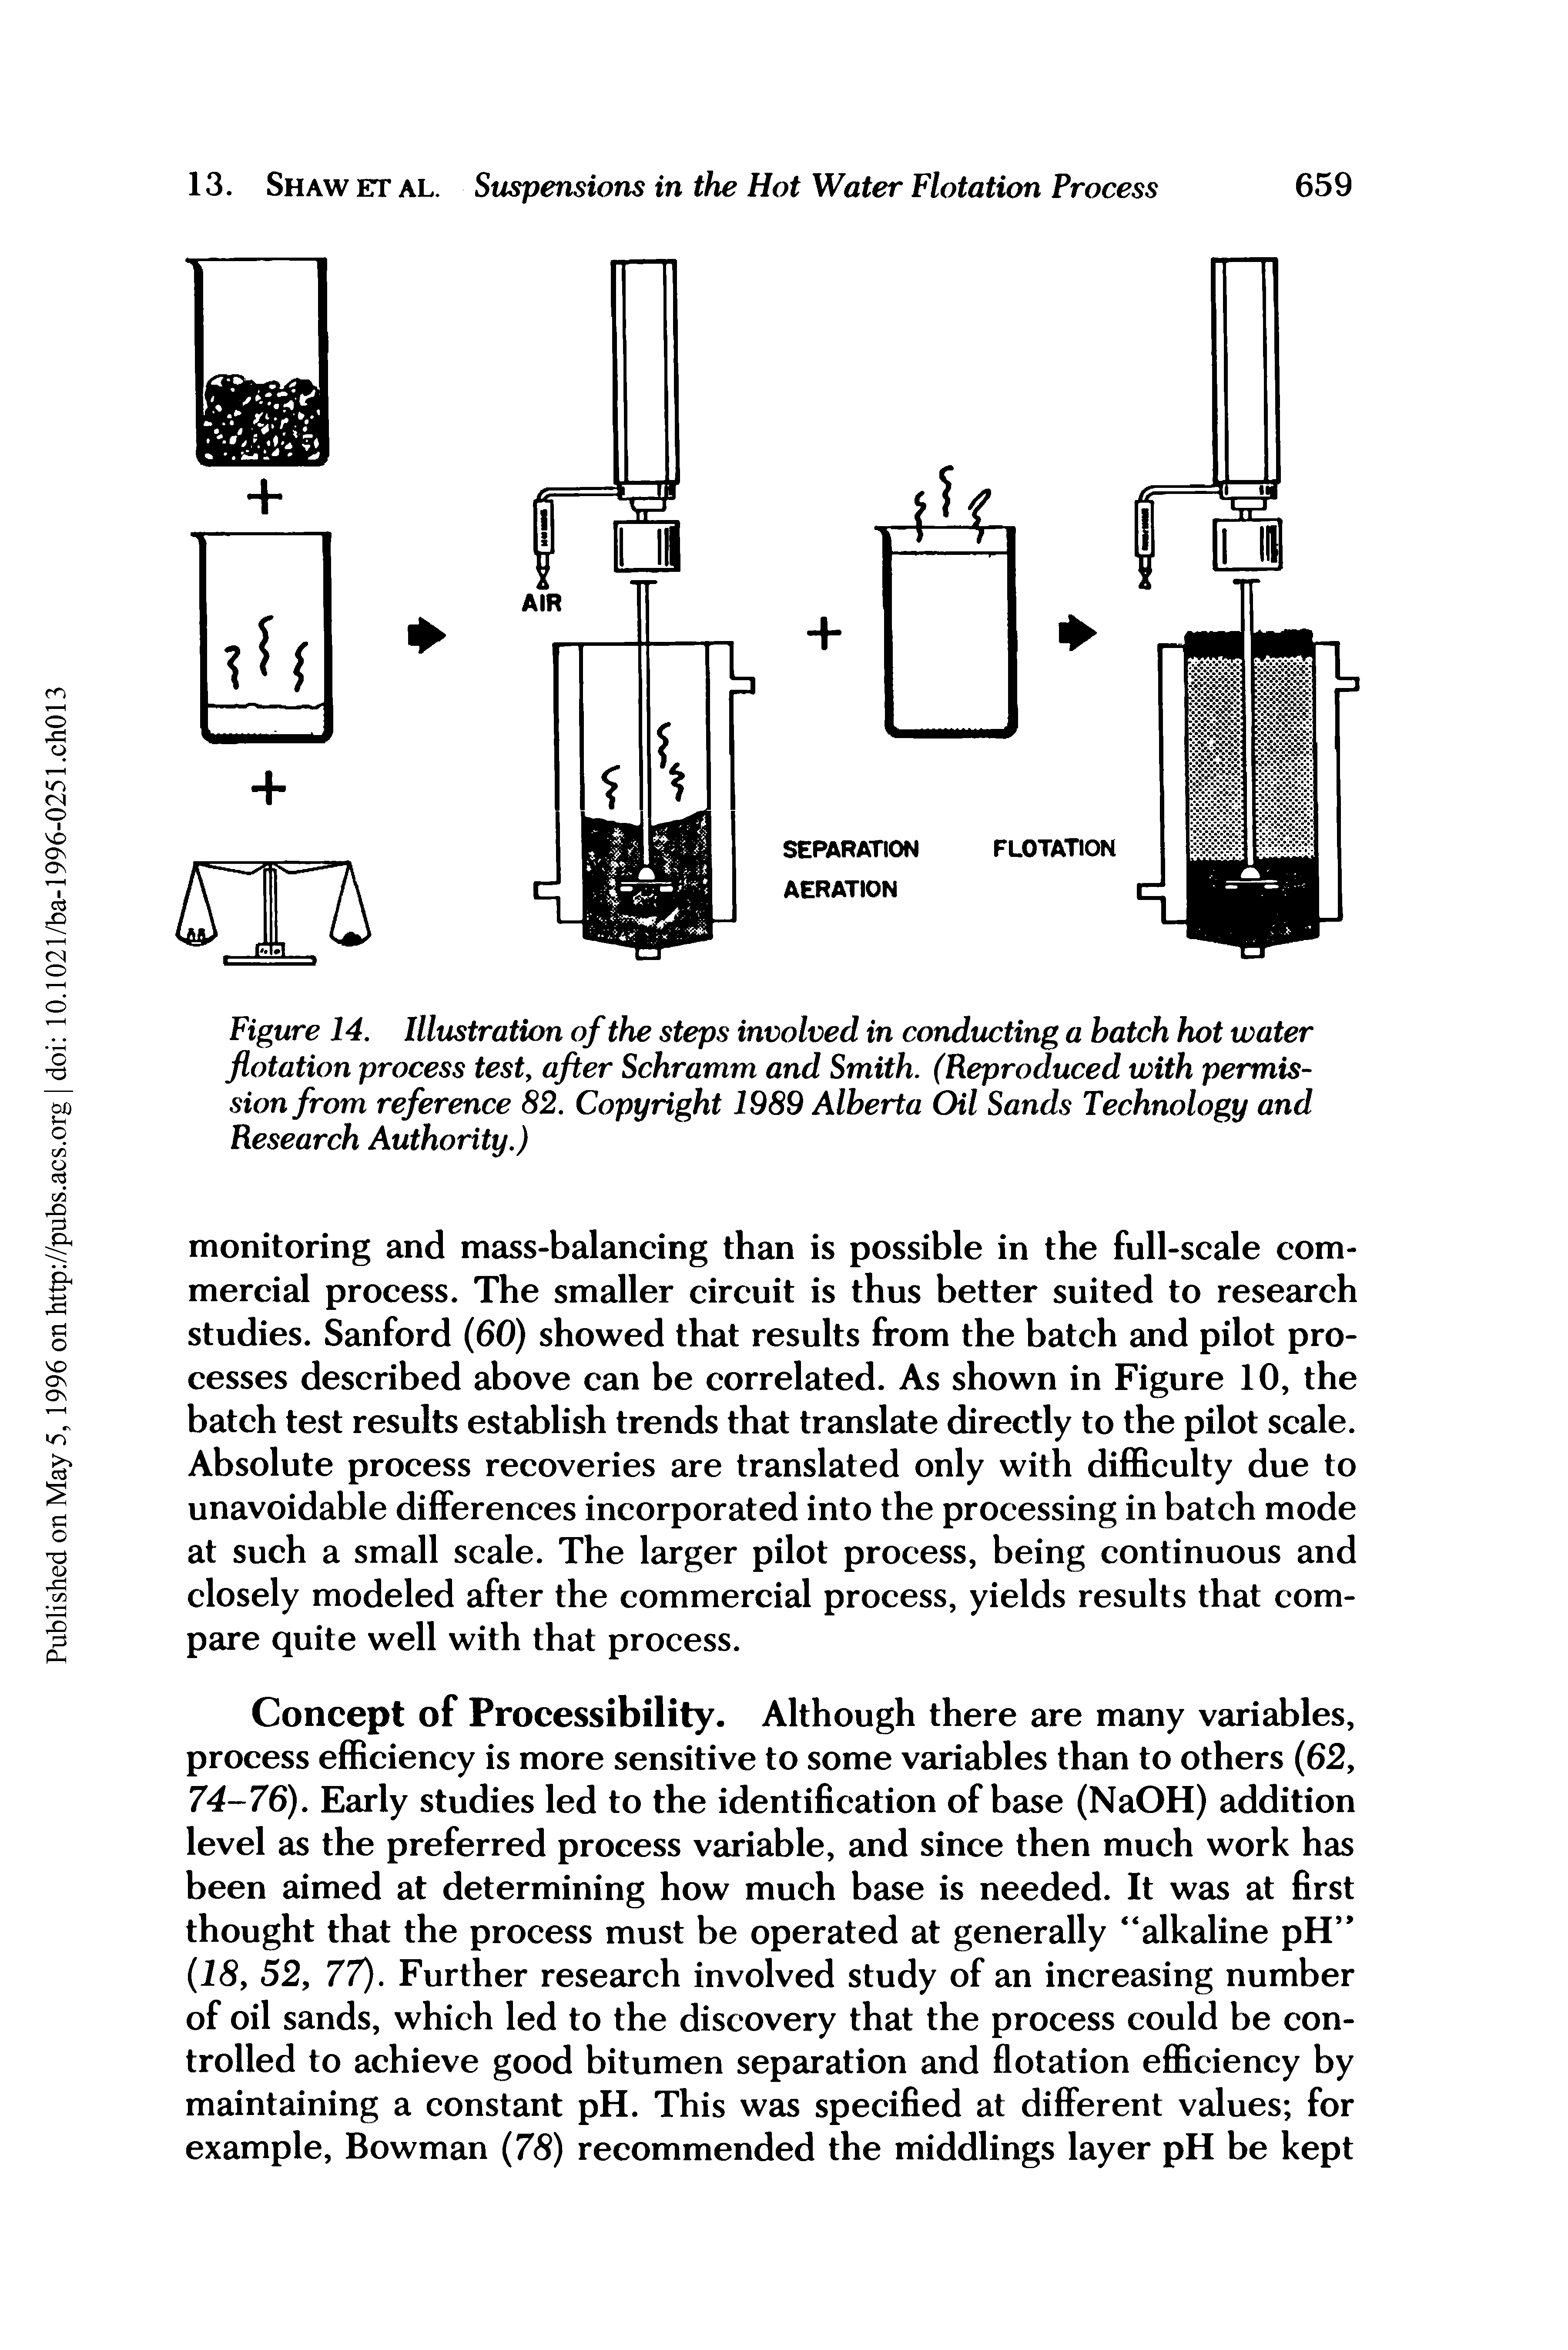 Figure 14. Illustration of the steps involved in conducting a batch hot water flotation process test, after Schramm and Smith. (Reproduced with permission from reference 82. Copyright 1989 Alberta Oil Sands Technology and Research Authority.)...